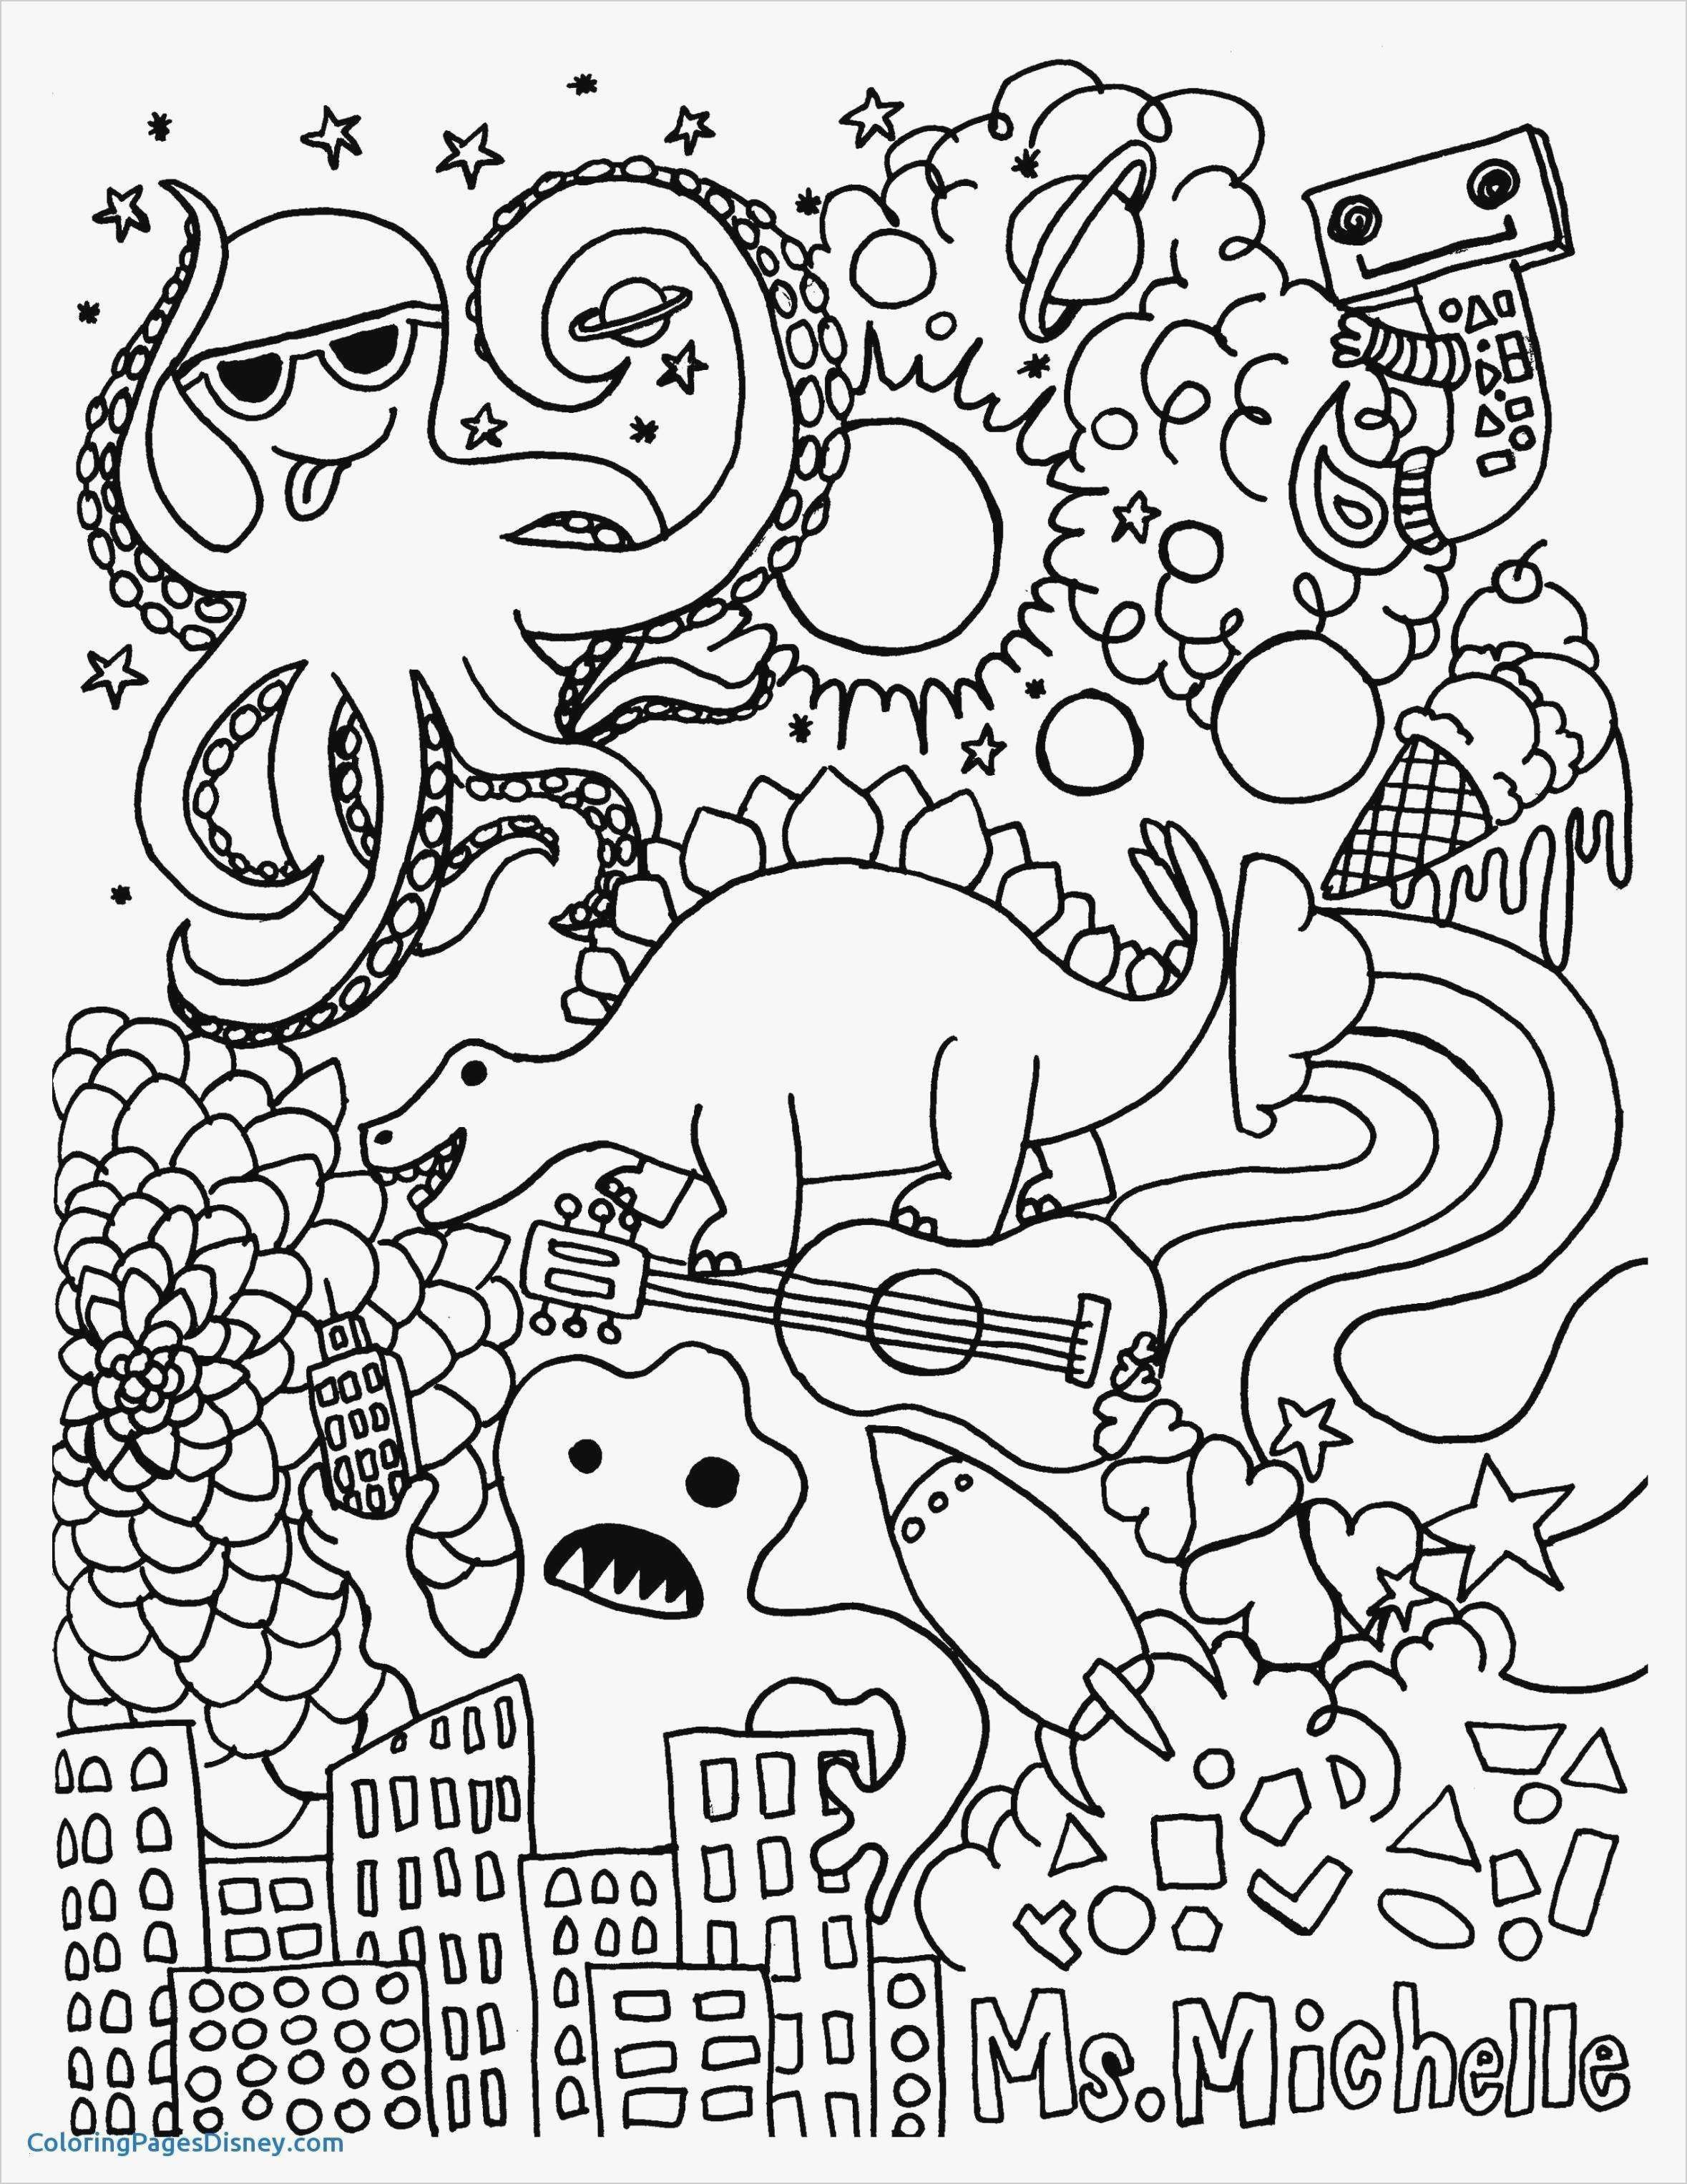 Free Christmas Printable Coloring Pages New Free Printable Coloring Pages For Adults Advanced Jvzooreview